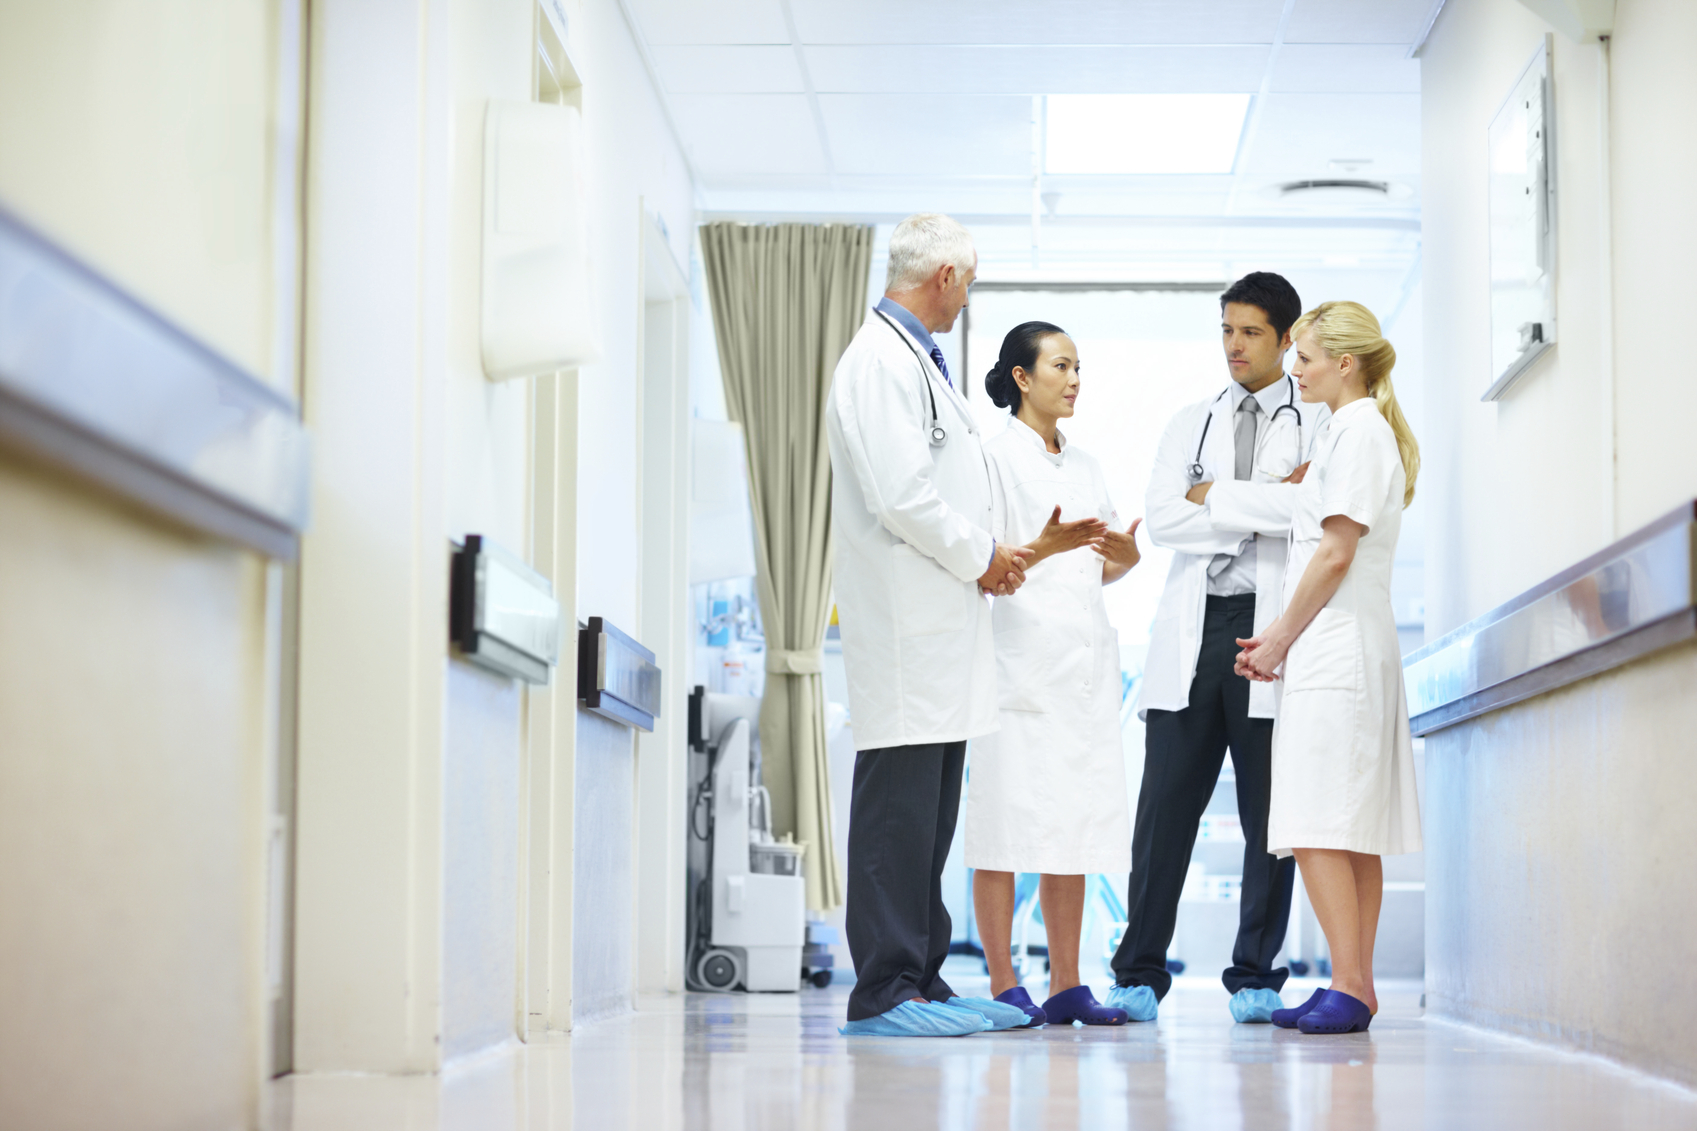 A group of doctors and nurses having a discussion in a hospital corridor